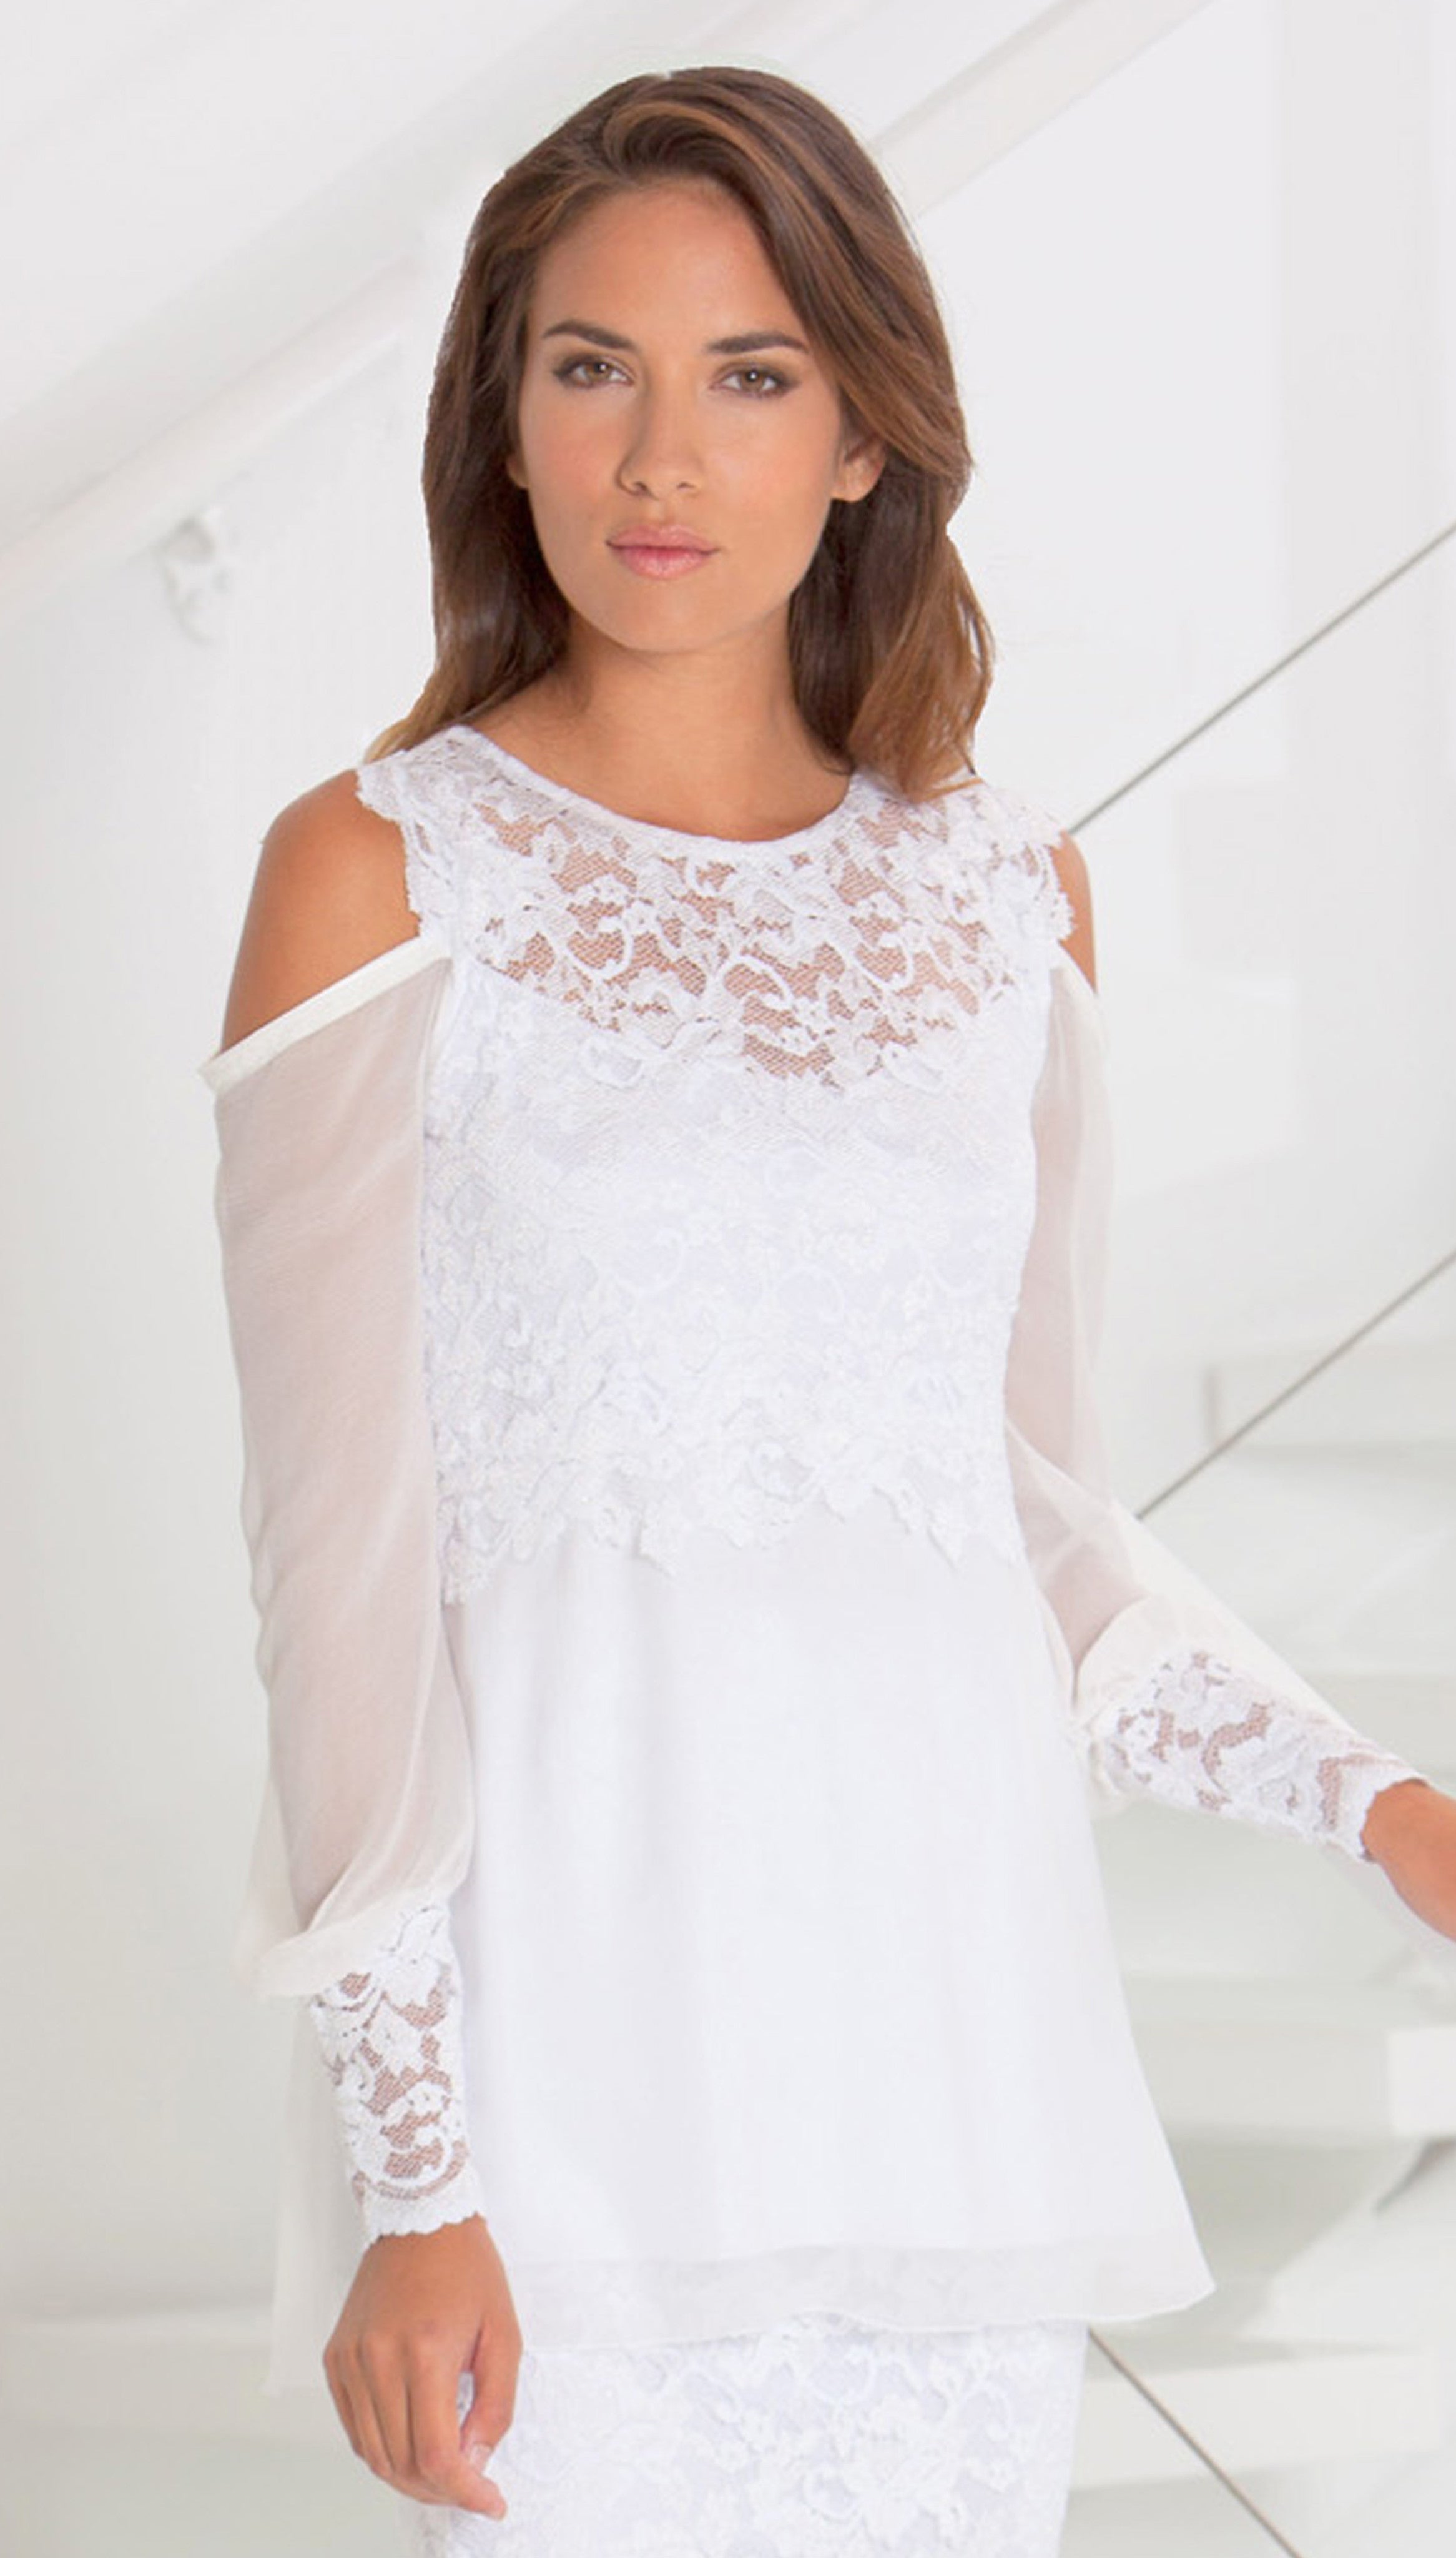 Silk Plisse' Cold Shoulder Top French Lace Trim - Code Home50Off at Checkout - Sara Mique Evening Wear